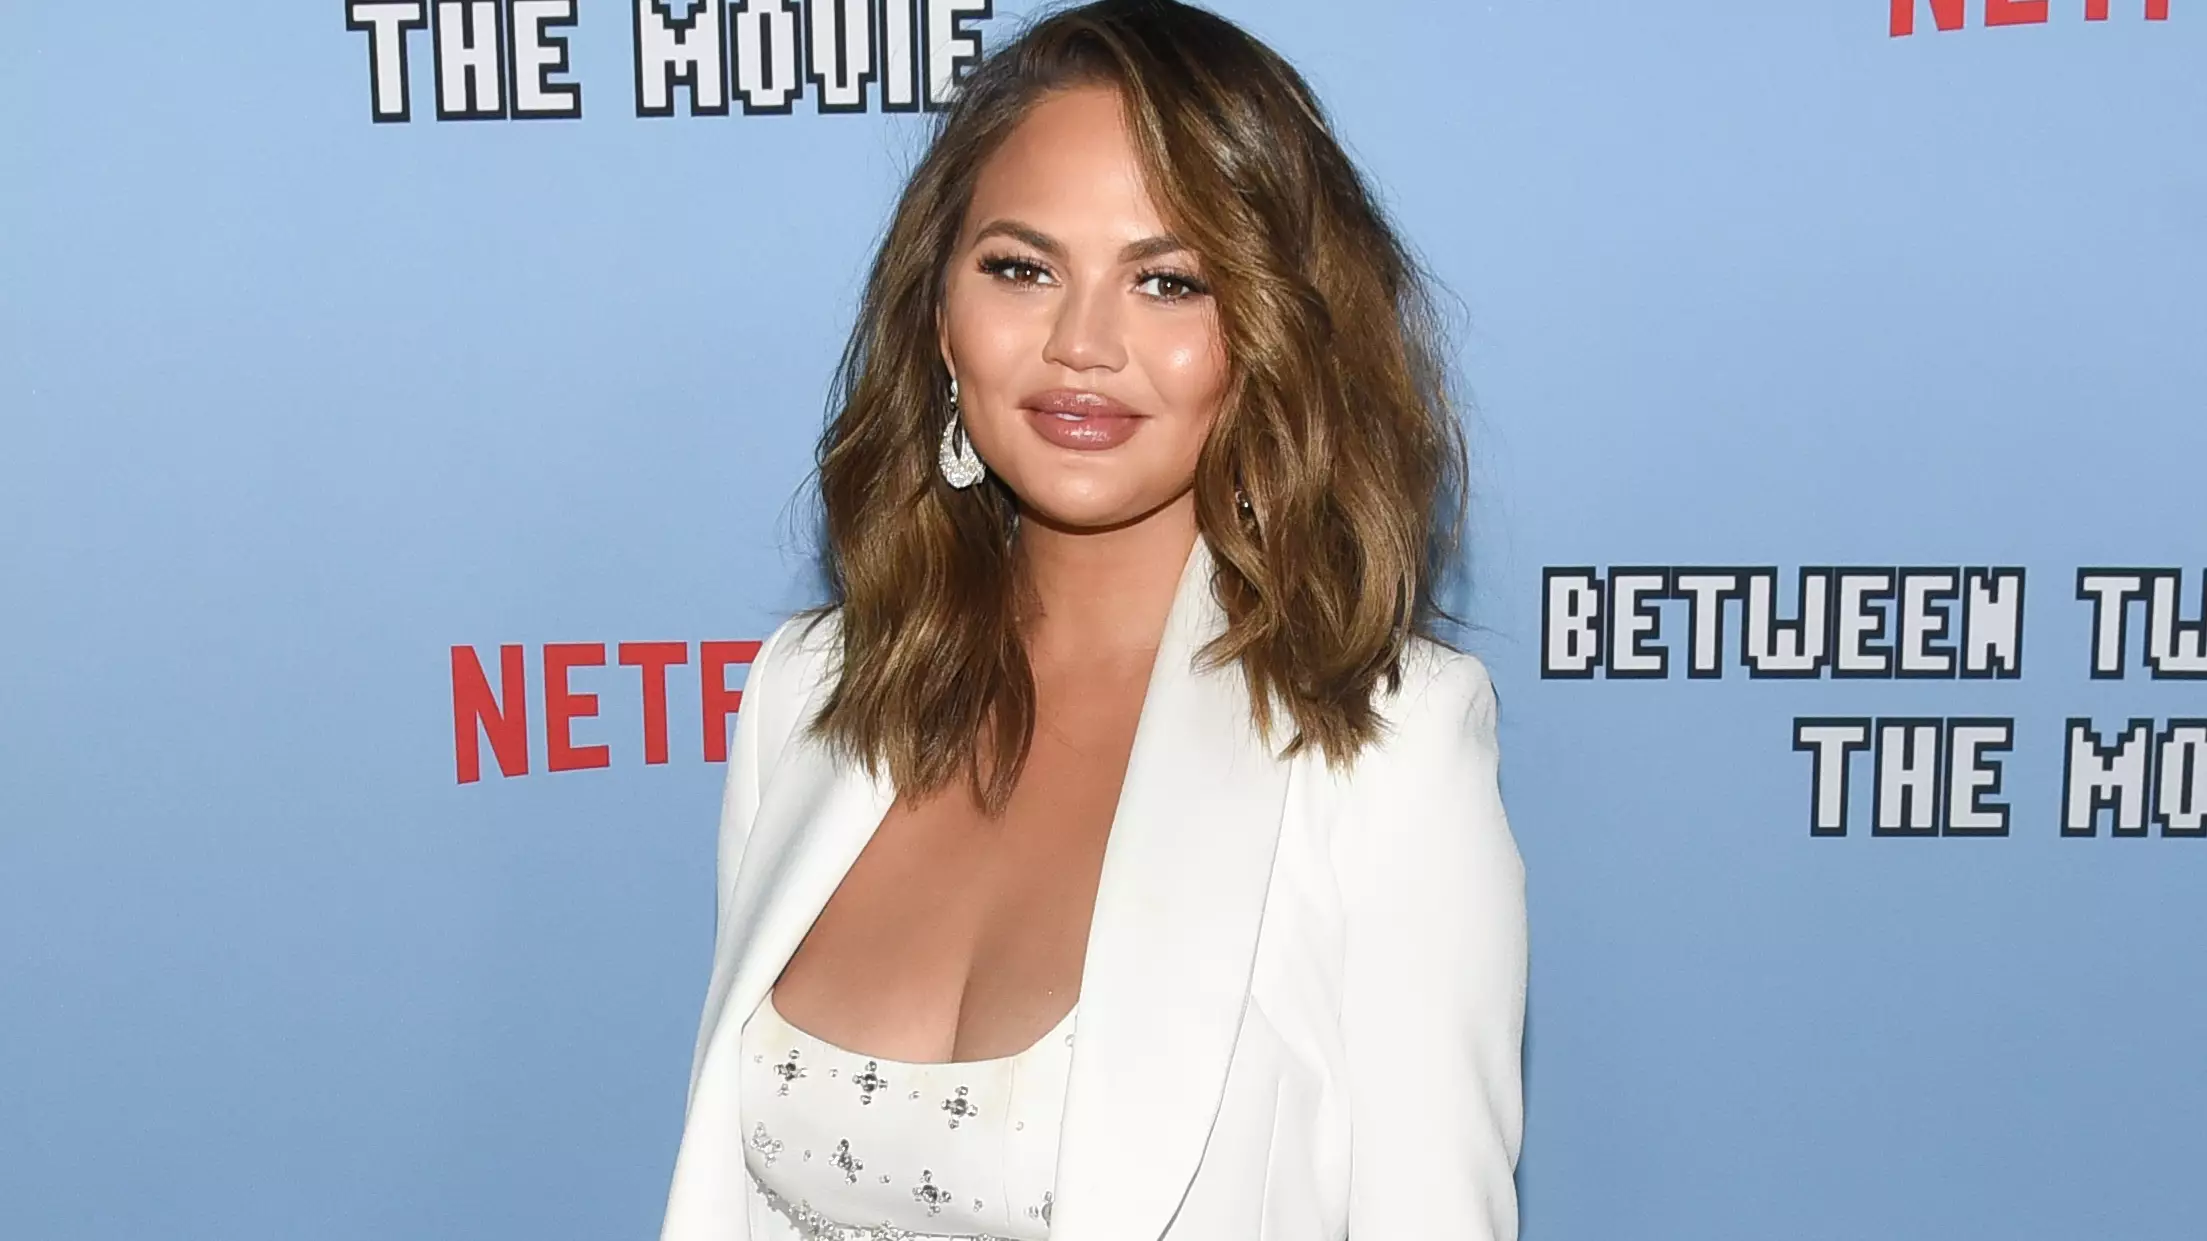 Chrissy Teigen Reminds Critics About Pregnancy Loss After Backlash For Saying She Has 'Nothing' During Pandemic